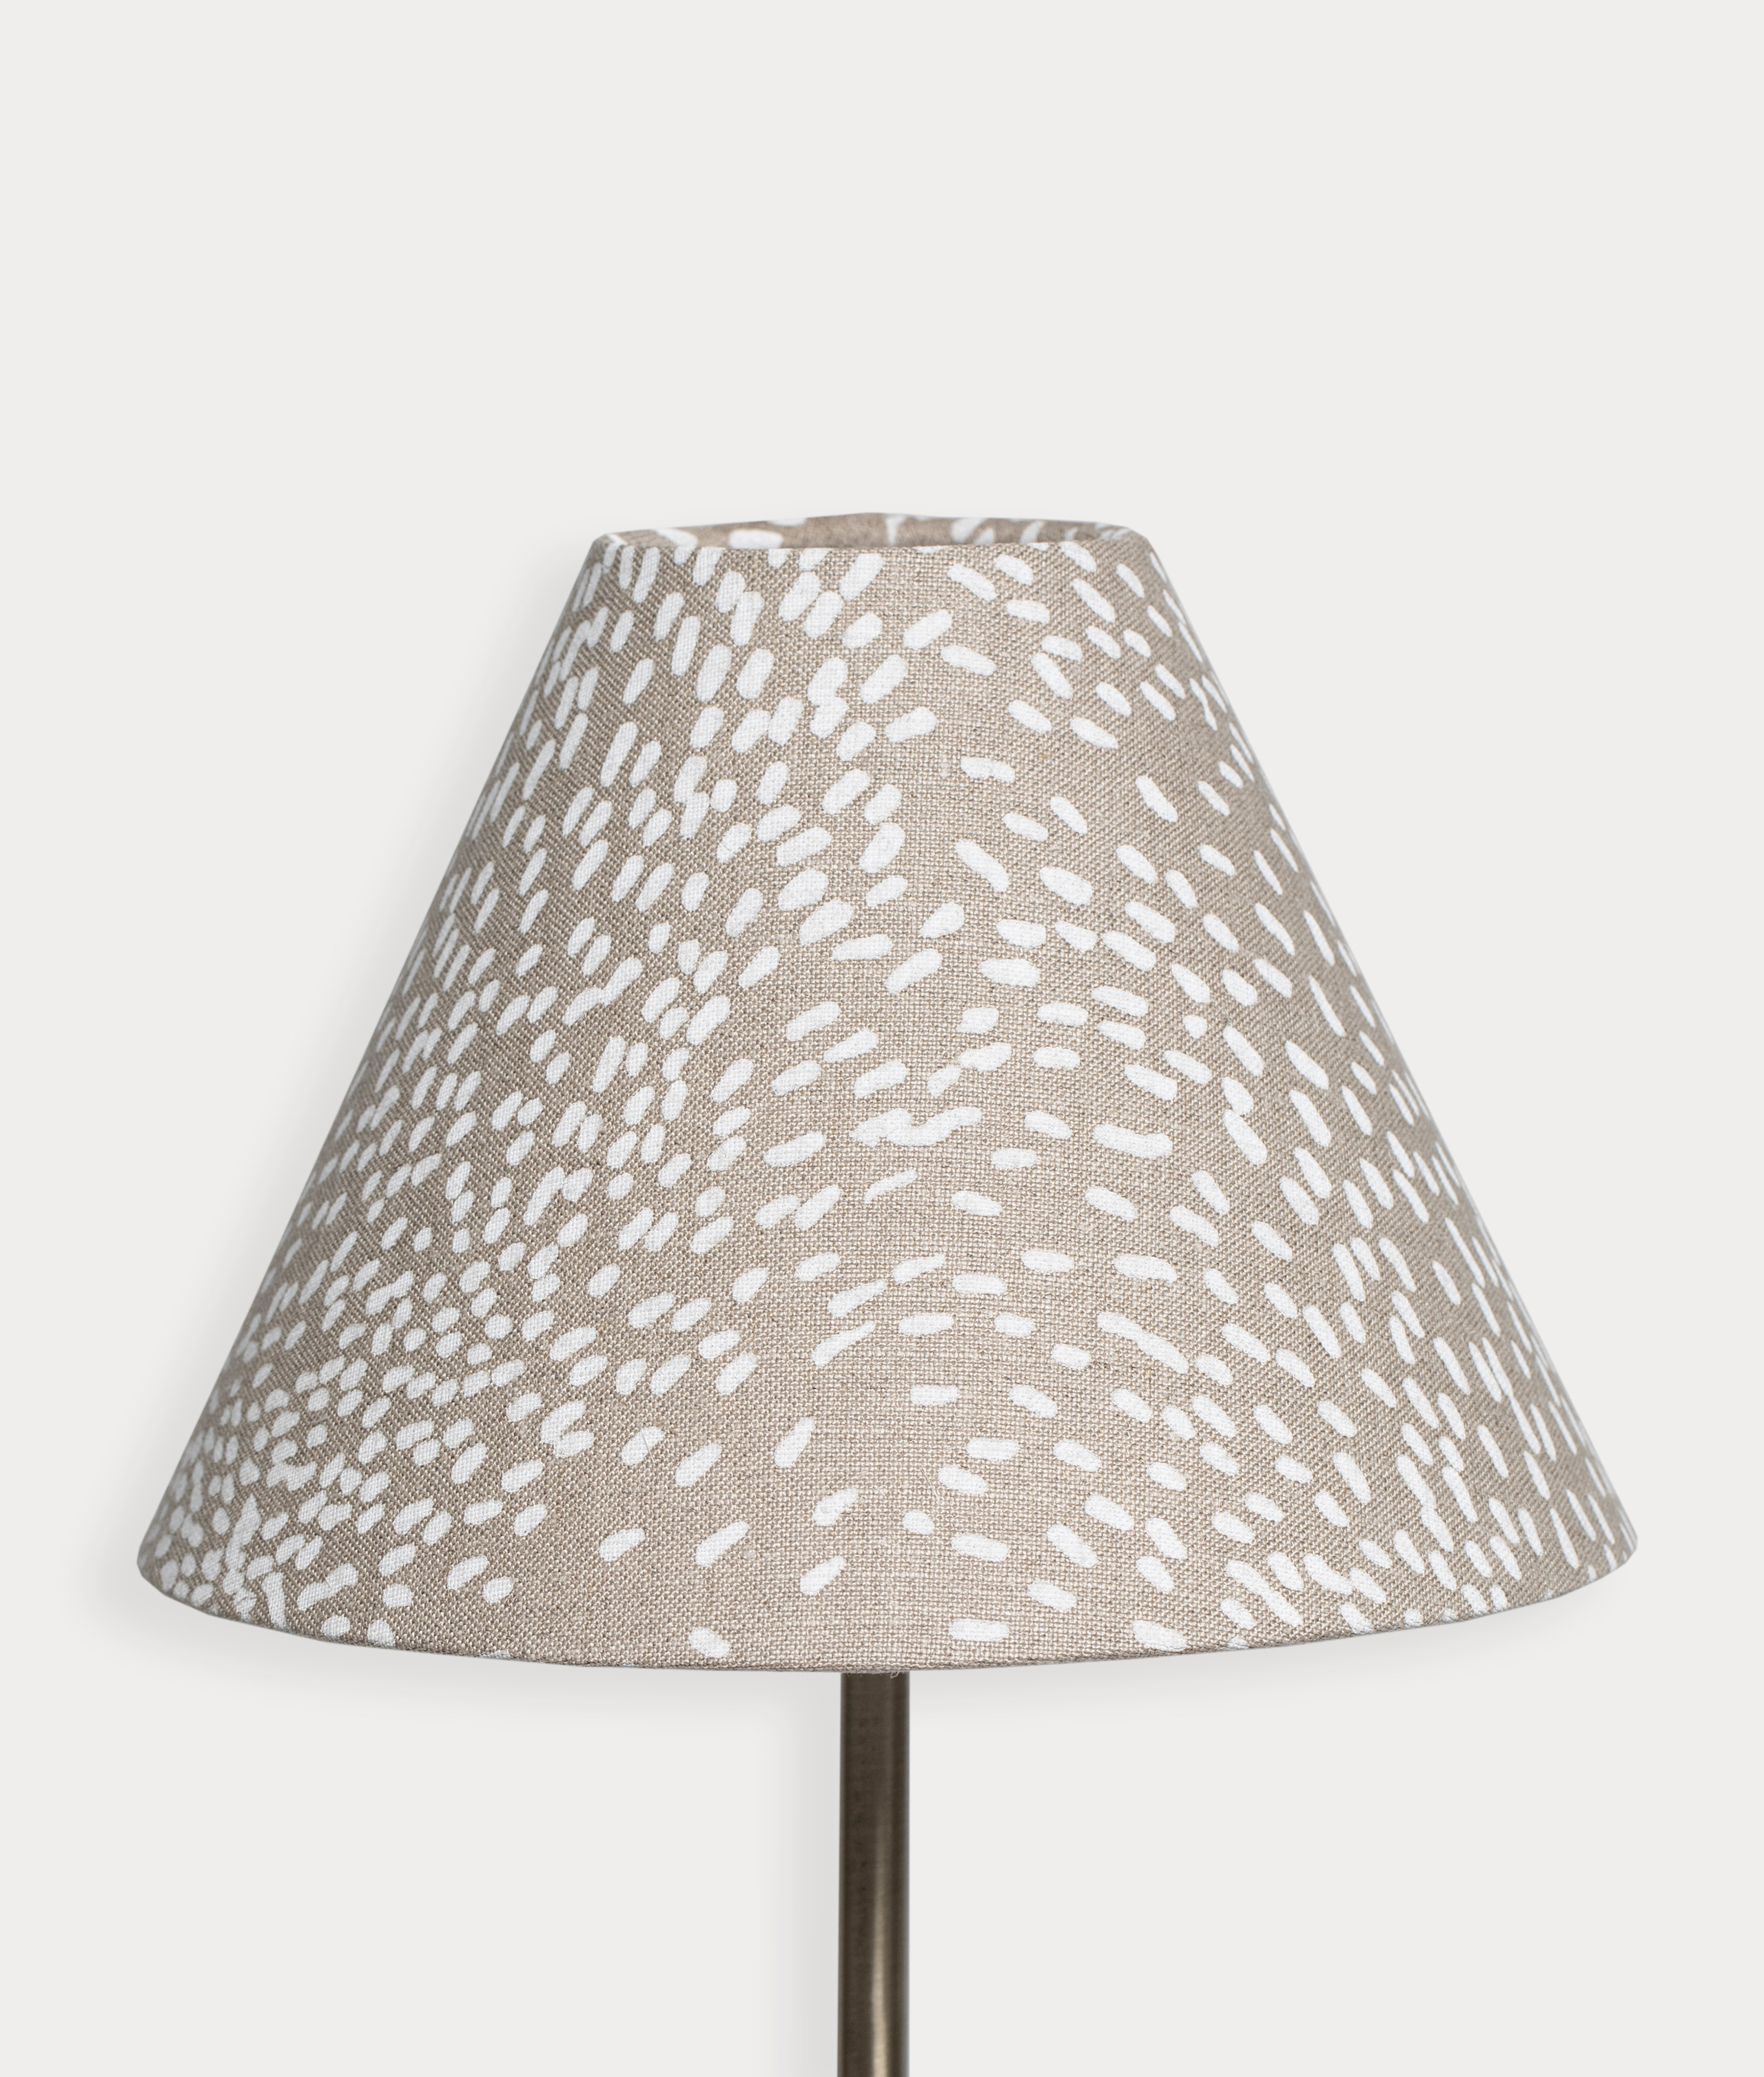 LAMPSHADE "POLLEN" White/Nature